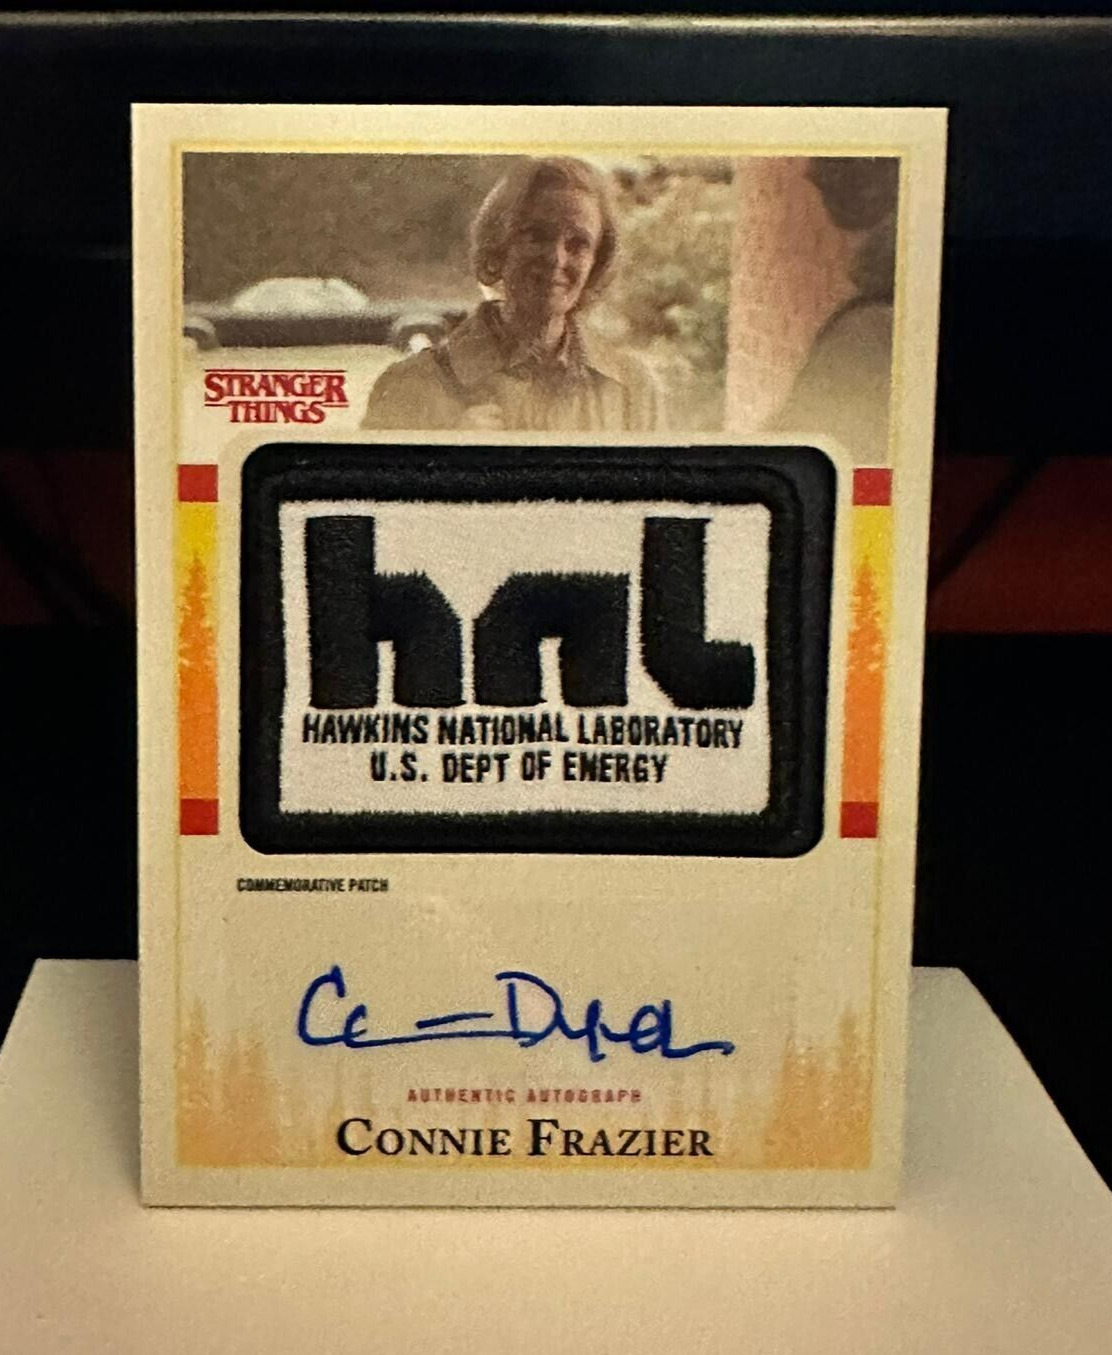 2018 Topps Stranger Things 2/10 Catherine Dyer Connie Frazier as Auto patch